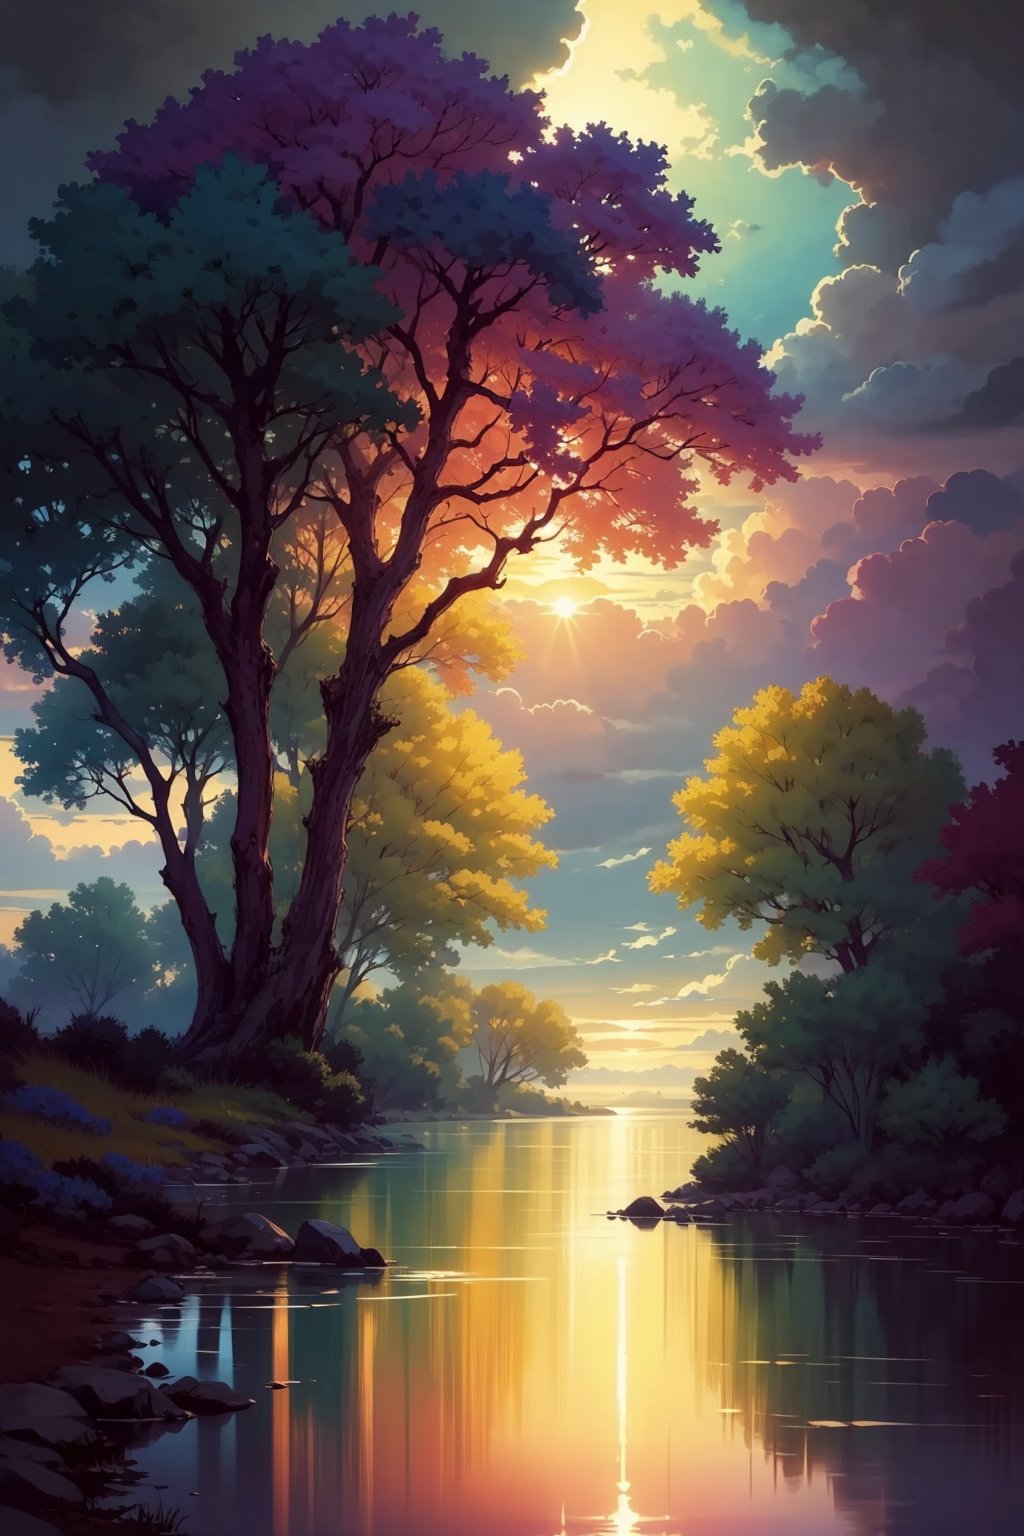 A serene outdoor setting as the sun sets behind a majestic tree, its branches stretching towards the vibrant orange and pink hues of the sky. Clouds are scattered across the canvas, gradually darkening to purple and blue. The calm surface of the water reflects the stunning colors, creating a perfect mirror image. The scenery is bathed in warm sunlight, casting a golden glow on the surrounding landscape.